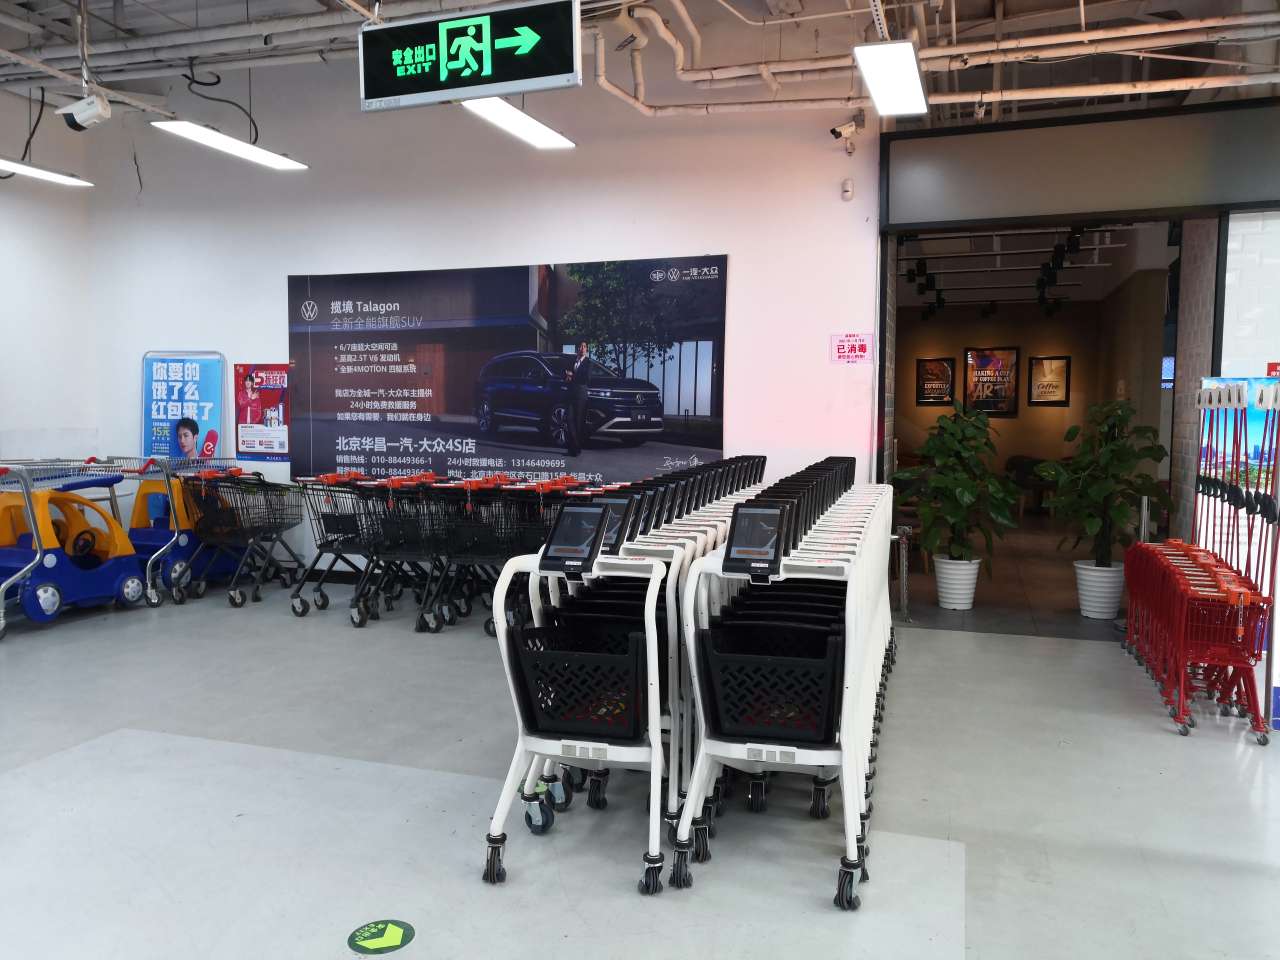 Wu Mart tests the new S model smart shopping cart from Superhii 